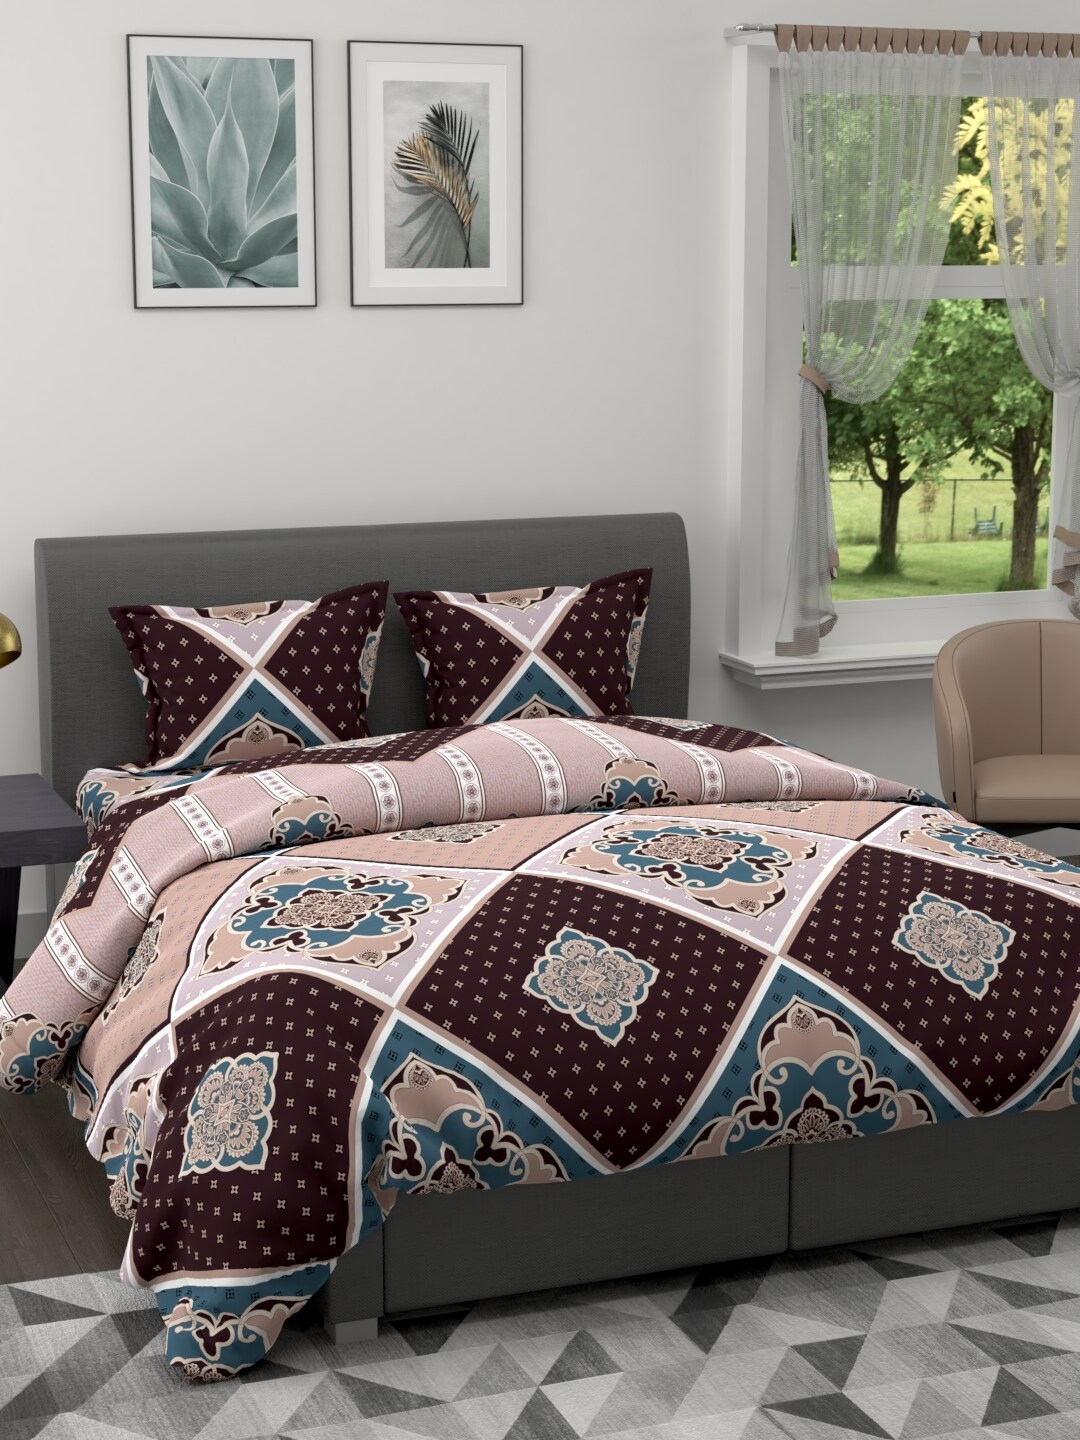 BIANCA Brown & Beige Ethnic Motifs Printed Cotton 150 GSM Double King Bedding Set Price in India